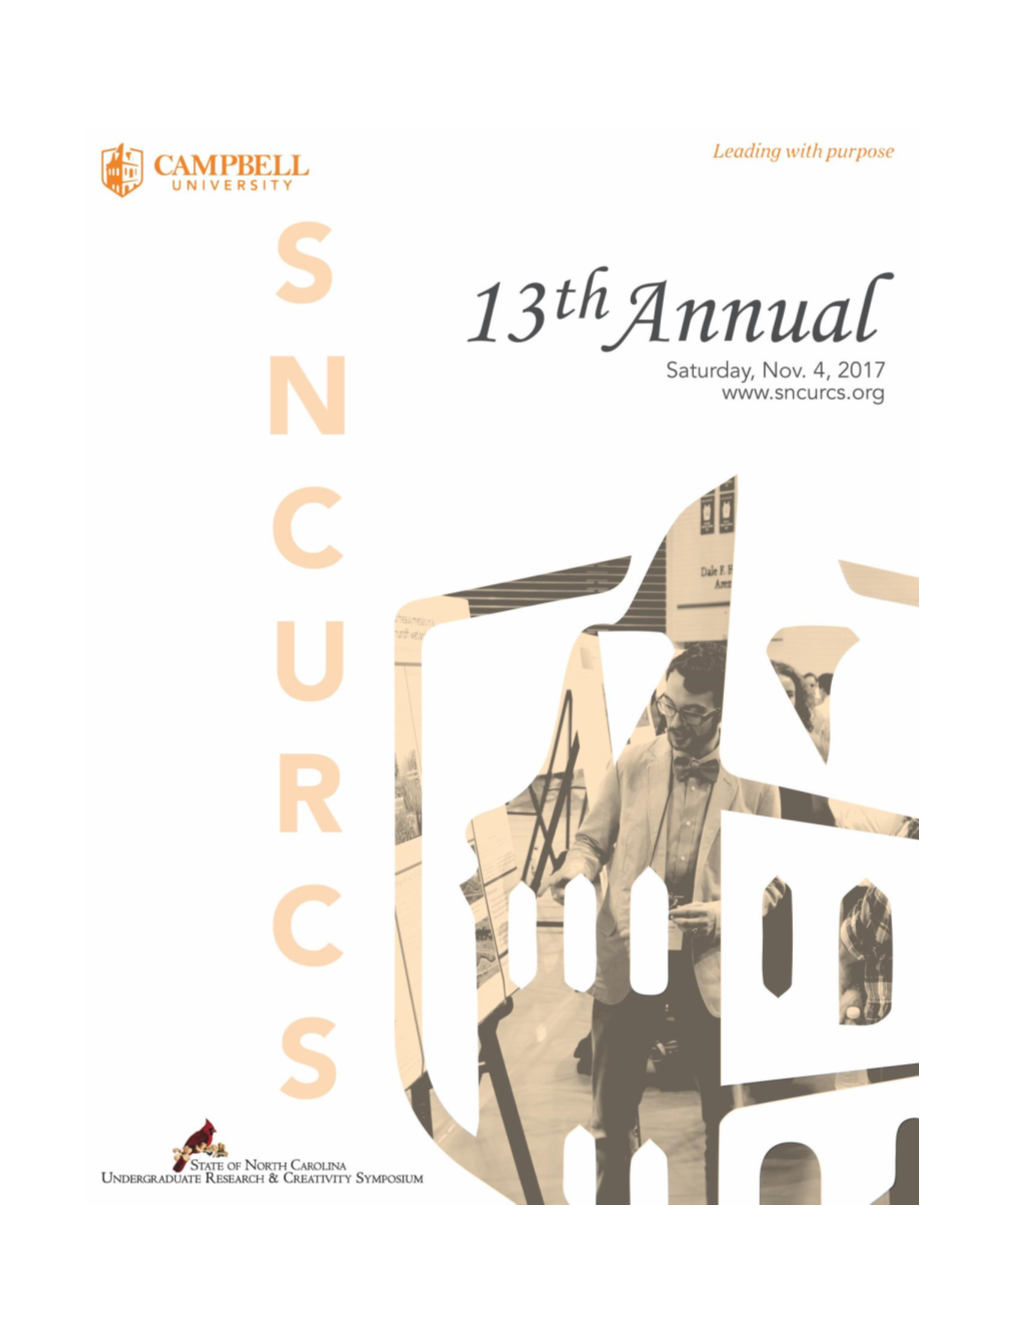 SNCURCS 2017 Hosted by Campbell University Schedule at a Glance November 4, 2017